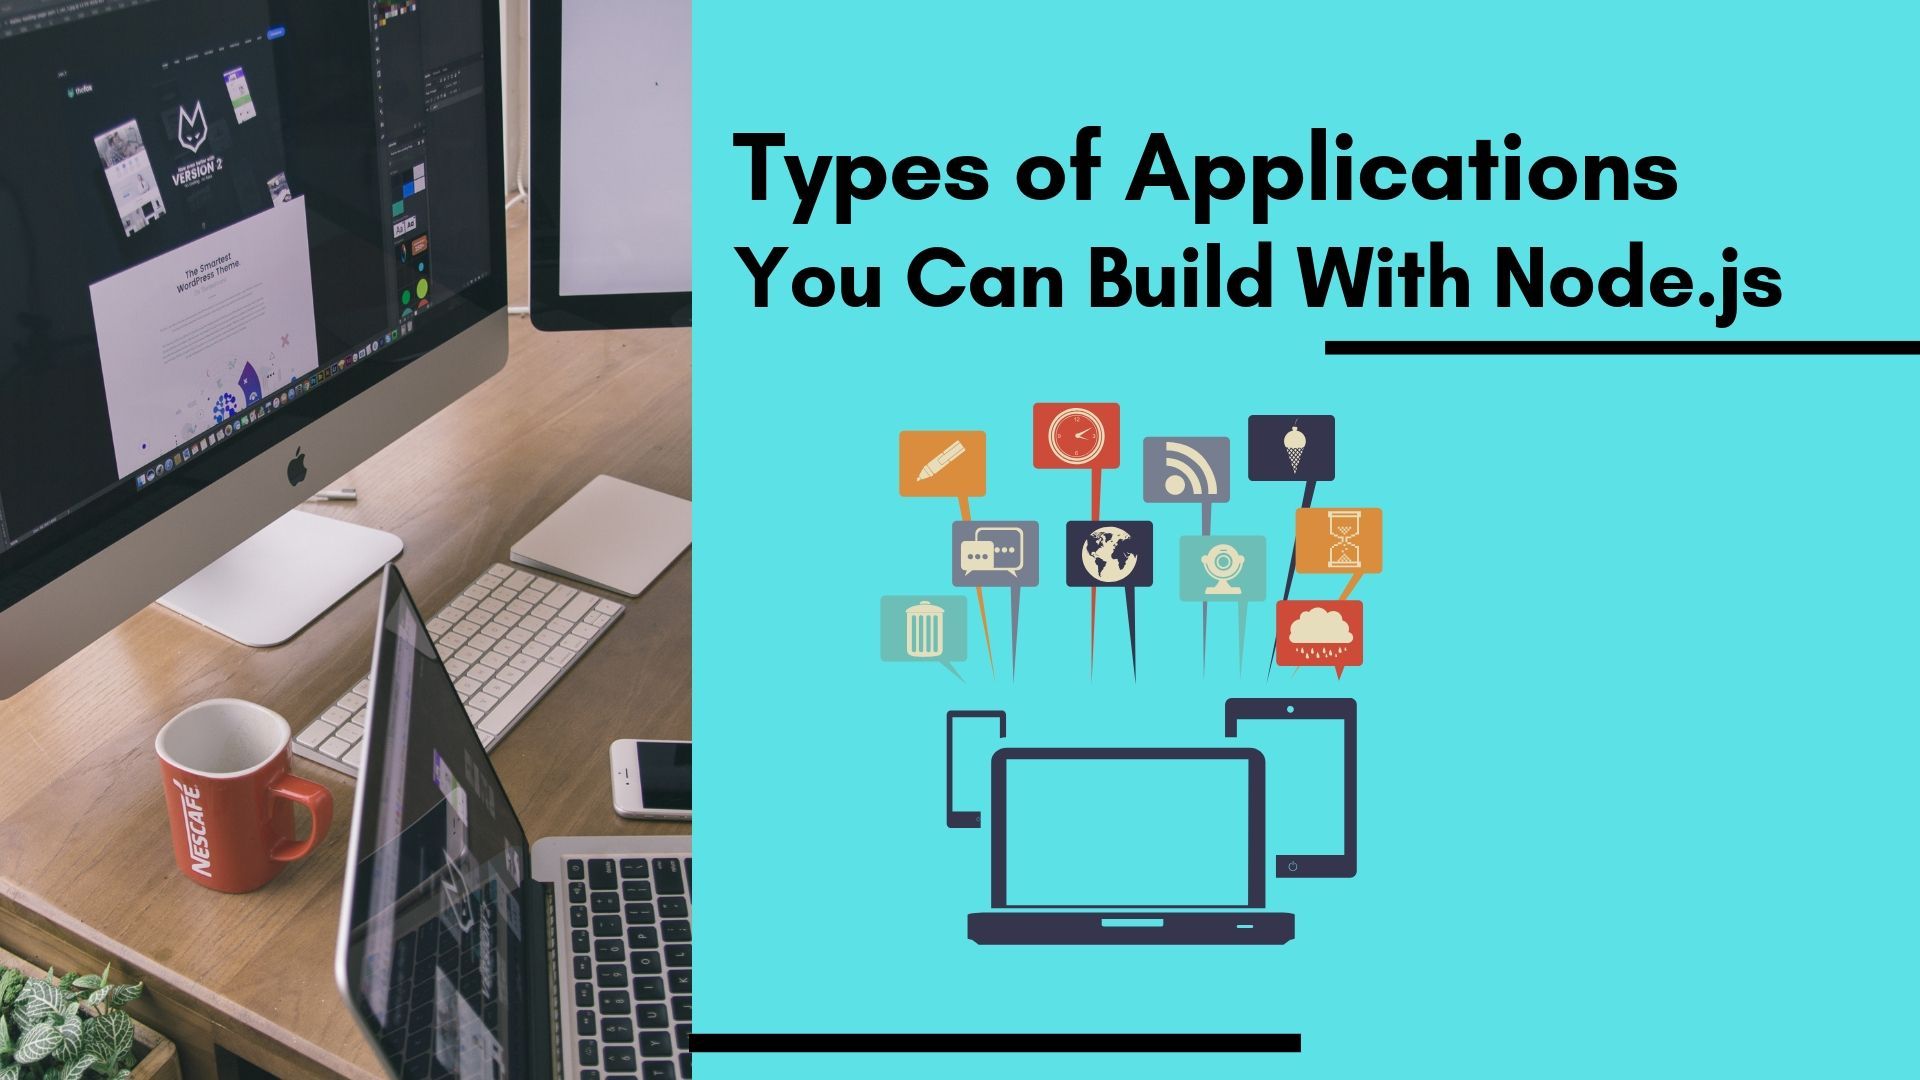 Types of Applications You Can Build With Node.js